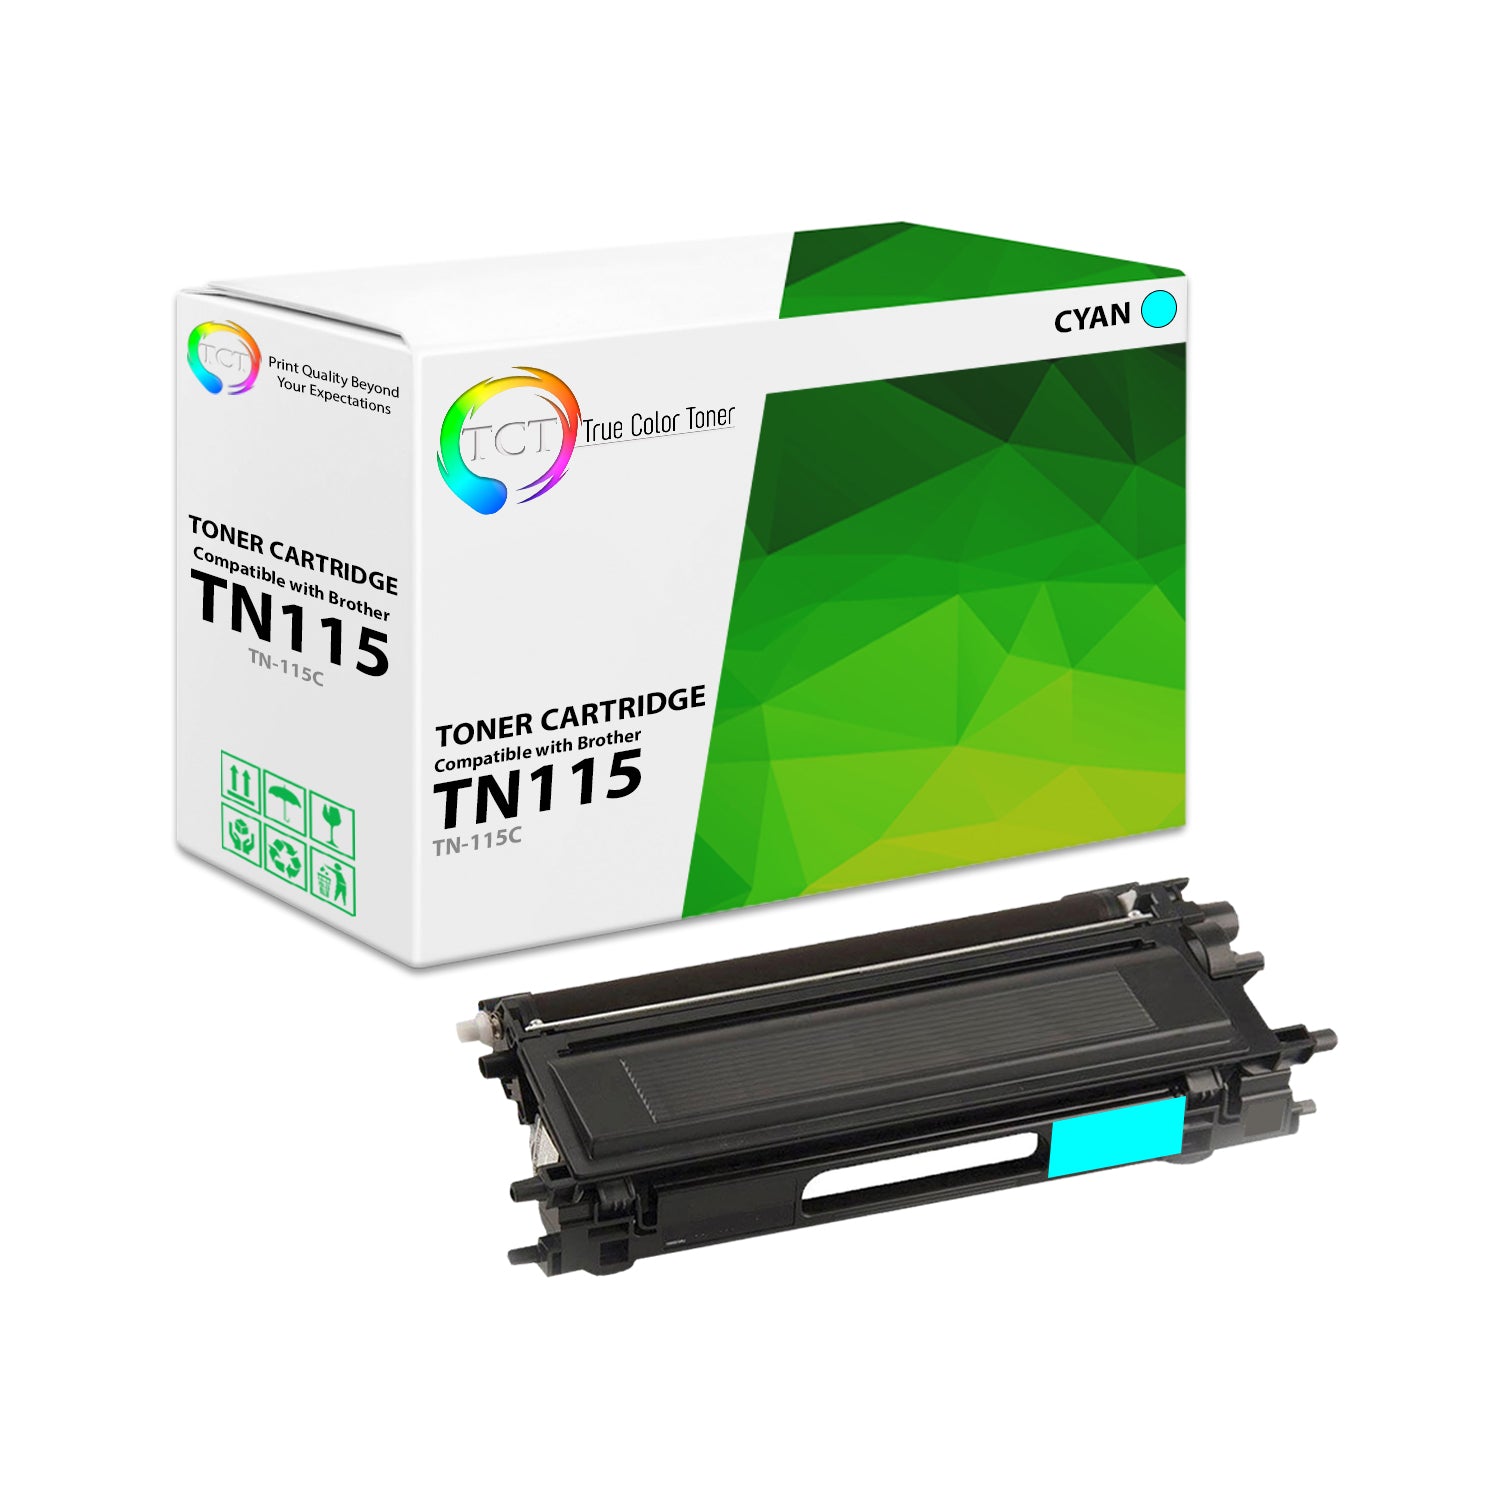 TCT Compatible Toner Cartridge Replacement for the Brother TN115 Series - 1 Pack Cyan